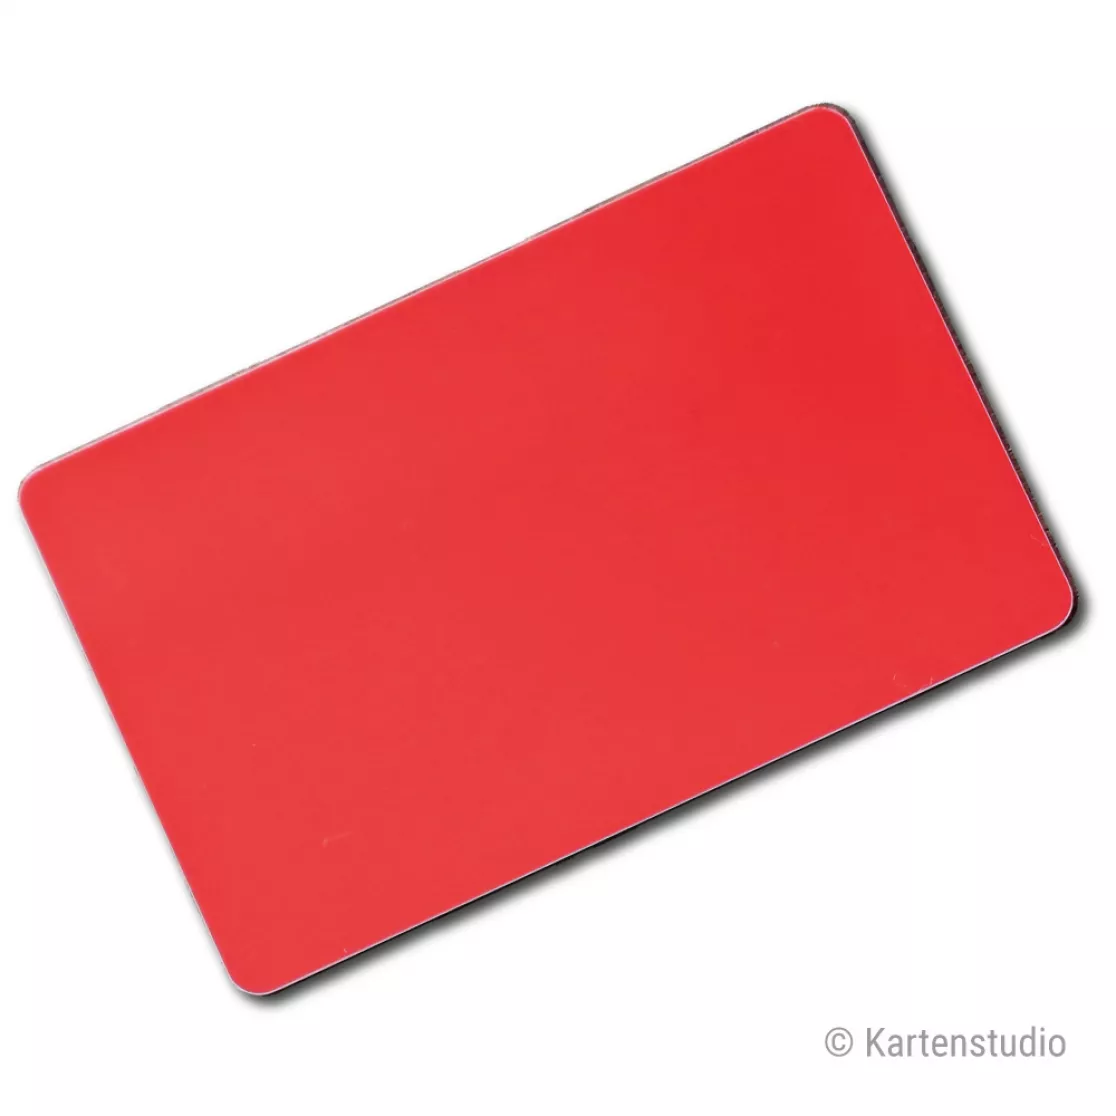 Plastic card red